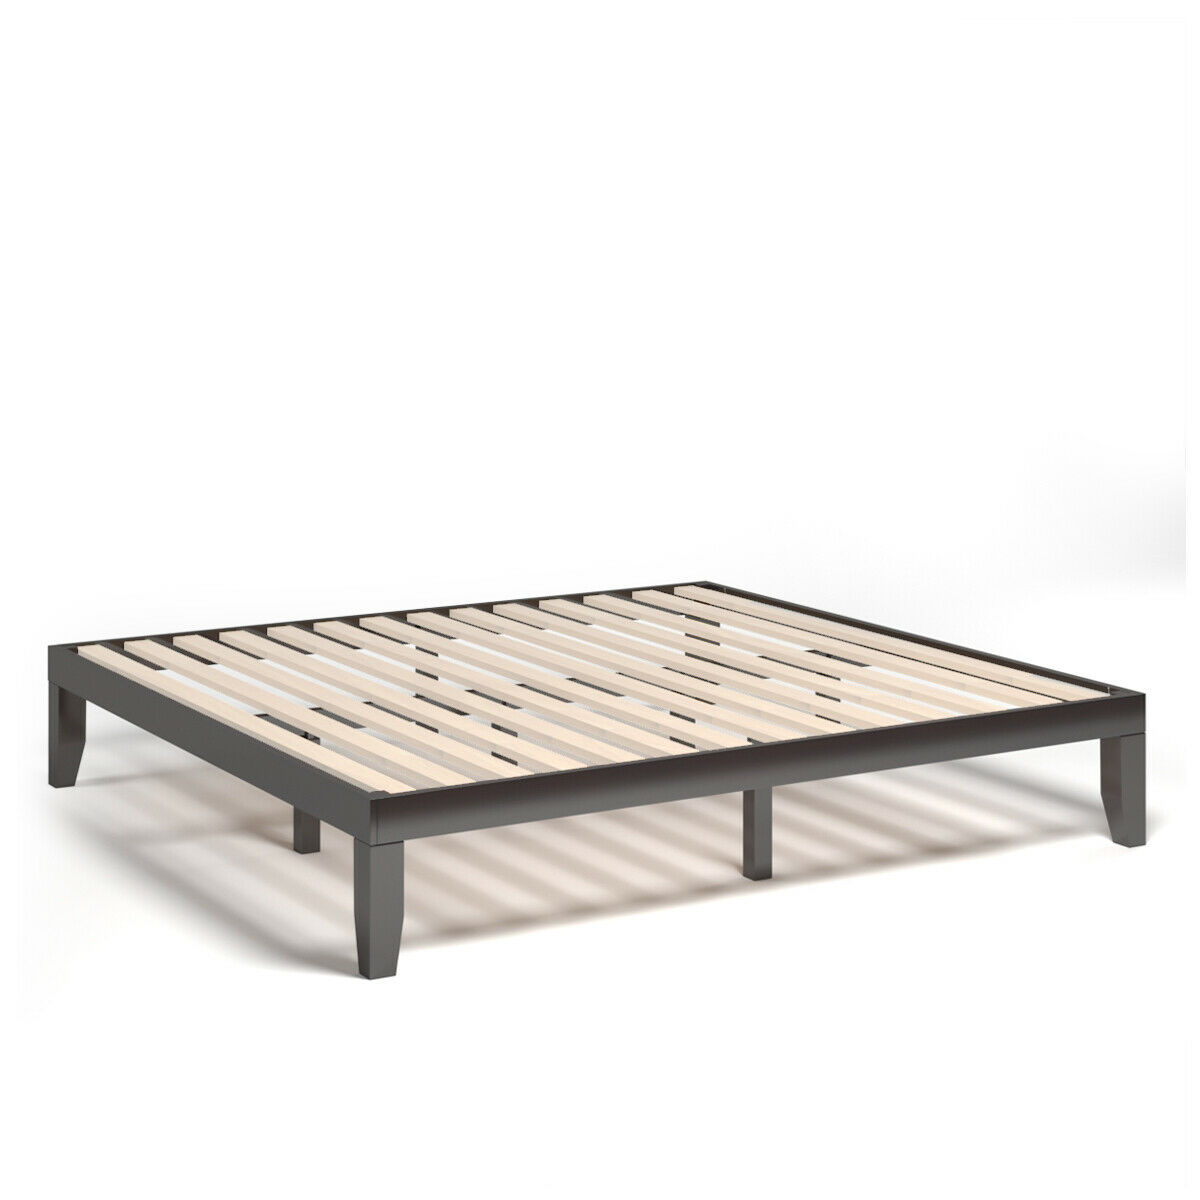 Gymax King Size 14 Wooden Bed Frame, King Size Bed Support